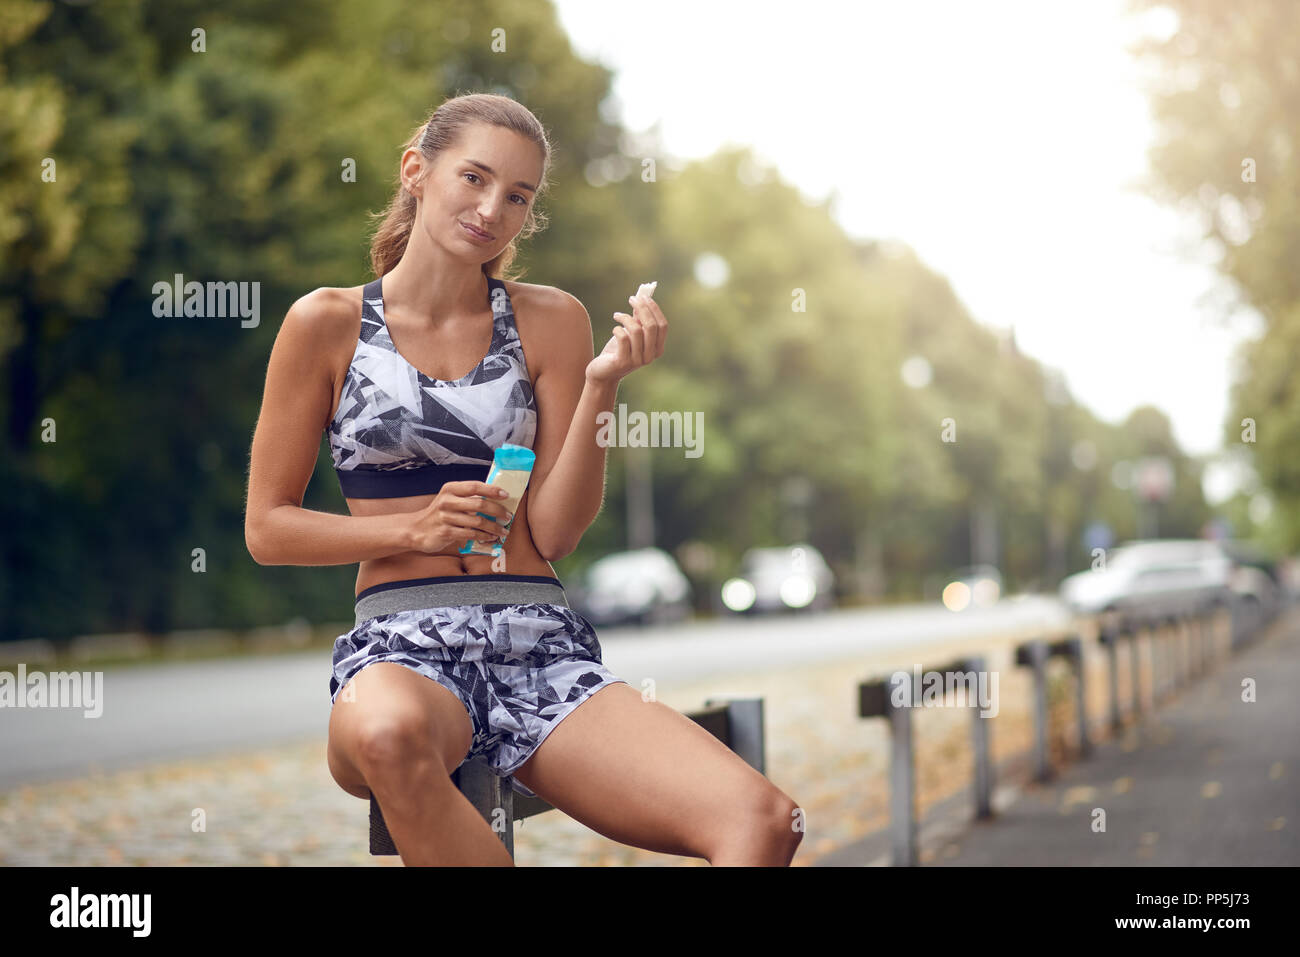 Sporty attractive slender young woman sitting on a roadside rail eating a piece of a protein bar as she takes a break from her daily jog Stock Photo